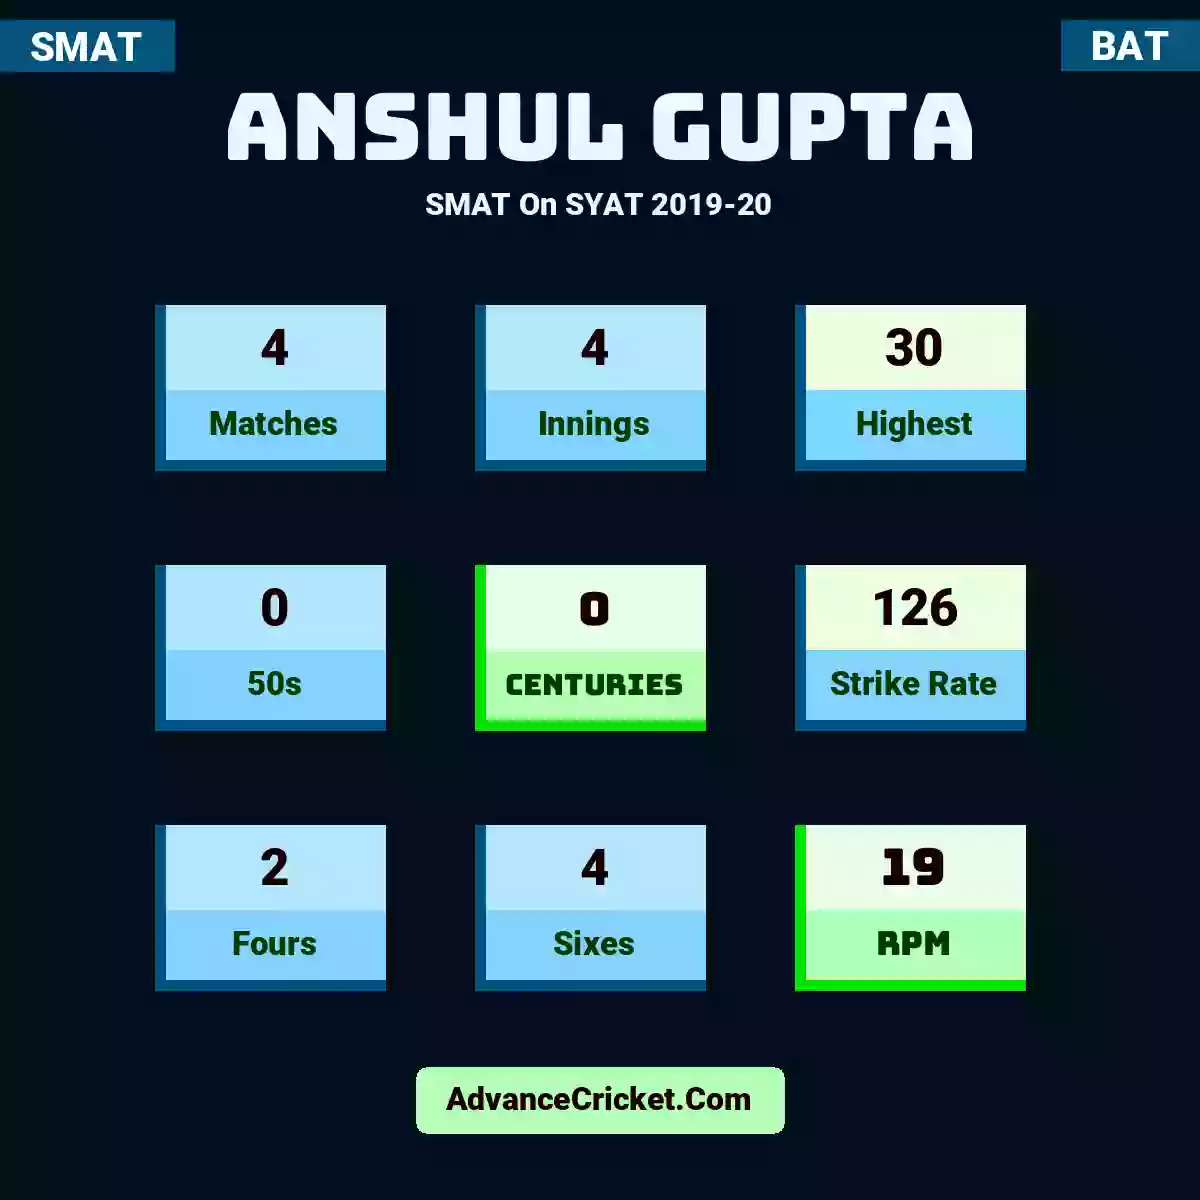 Anshul Gupta SMAT  On SYAT 2019-20, Anshul Gupta played 4 matches, scored 30 runs as highest, 0 half-centuries, and 0 centuries, with a strike rate of 126. A.Gupta hit 2 fours and 4 sixes, with an RPM of 19.